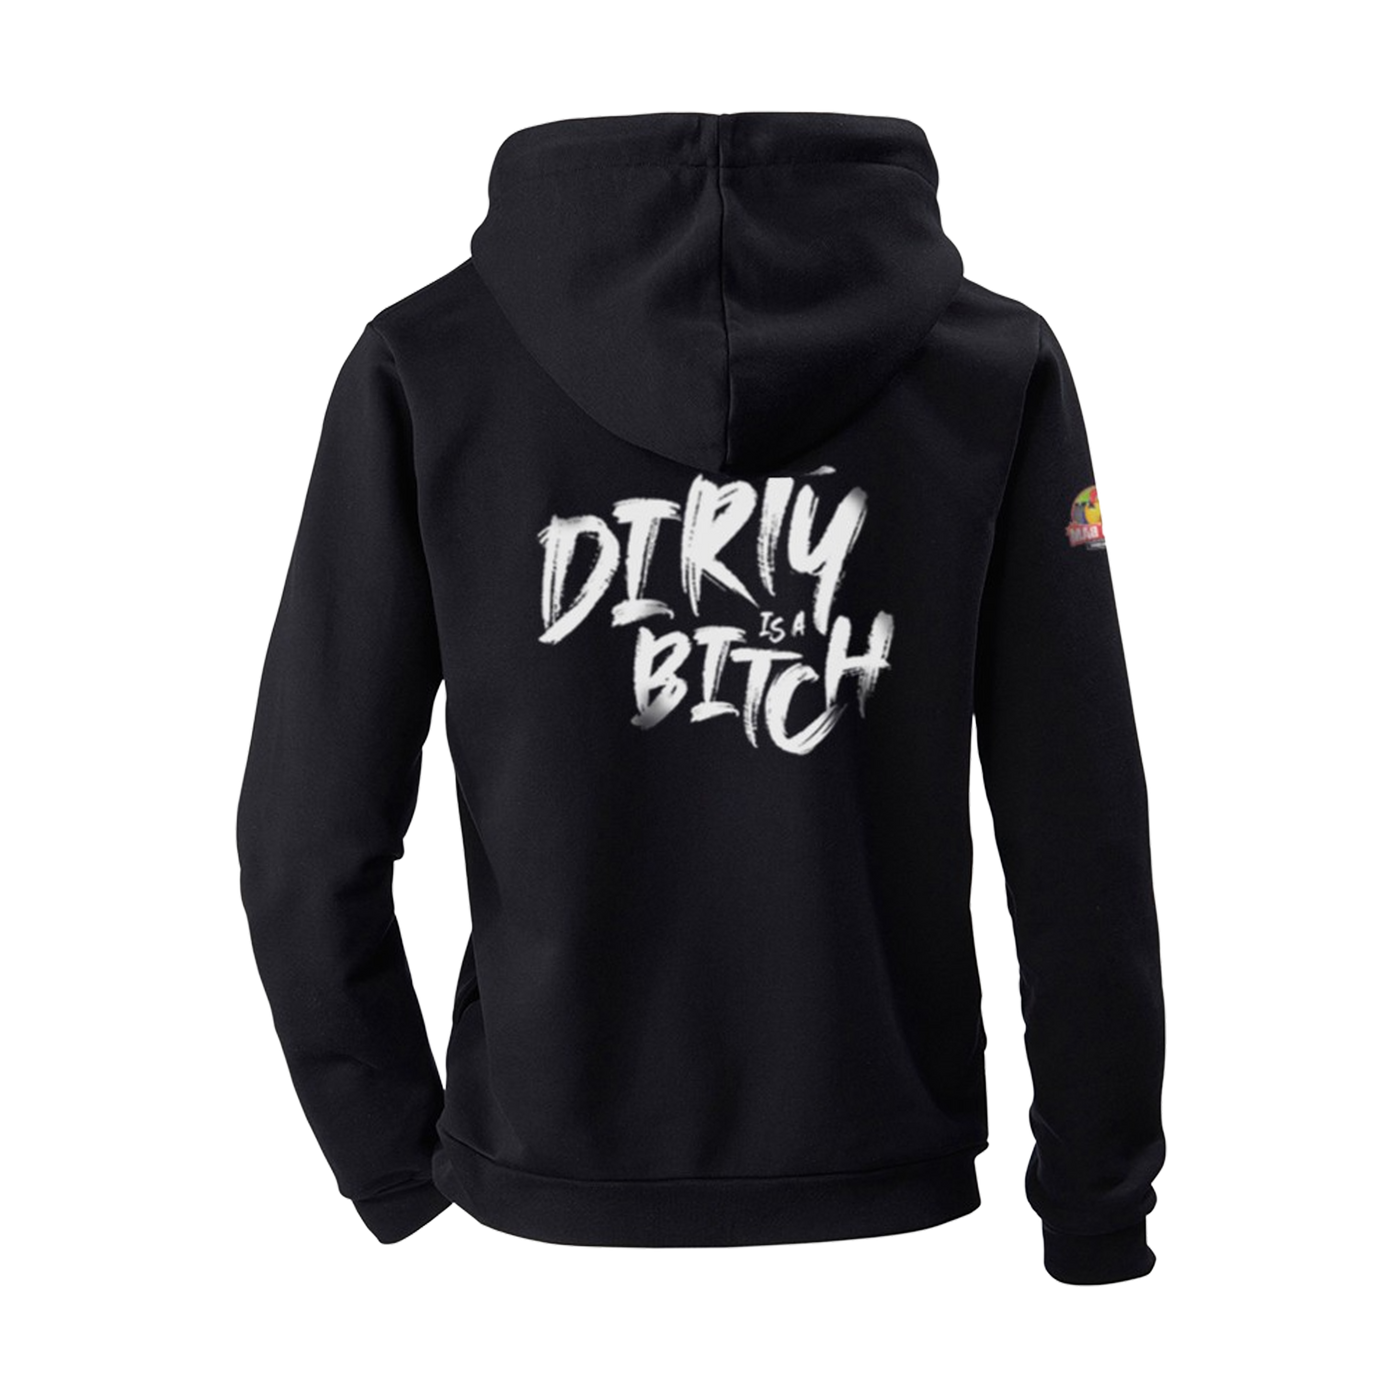 "Dirty is a Bitch" hoodie black unisex